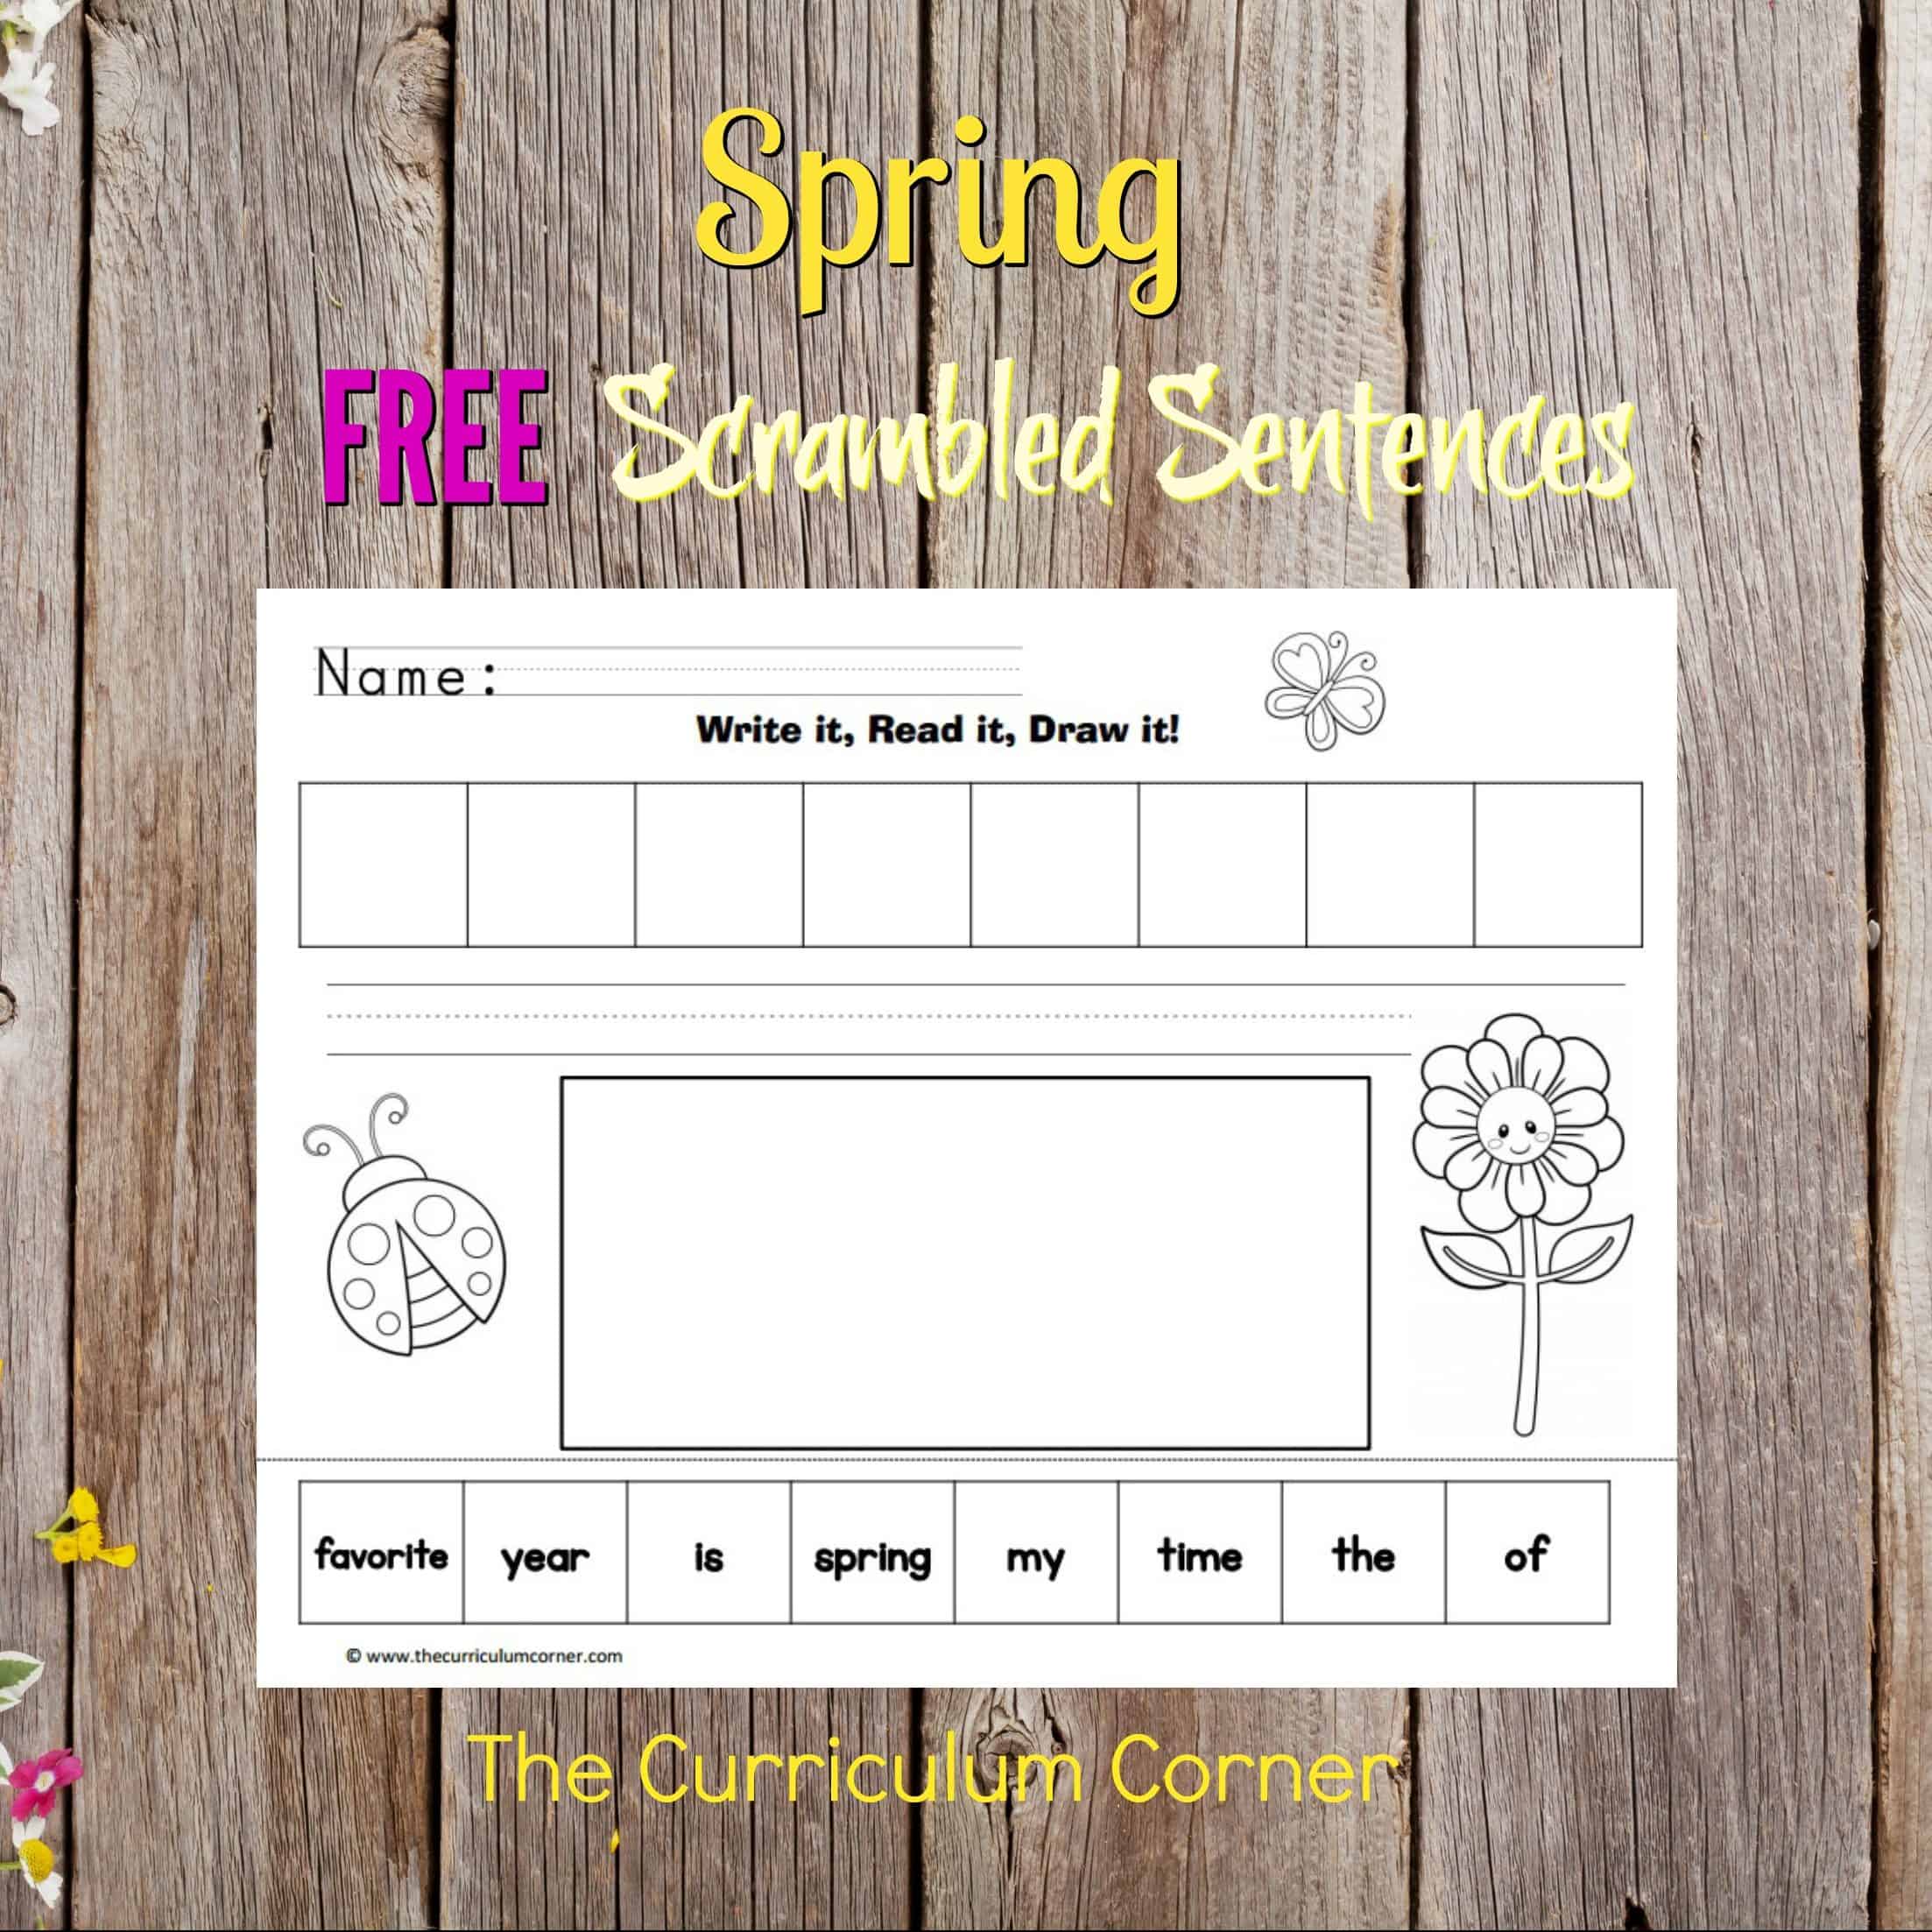 FREE Spring Write, Read, Draw Scrambled Sentences Literacy Center from The Curriculum Corner